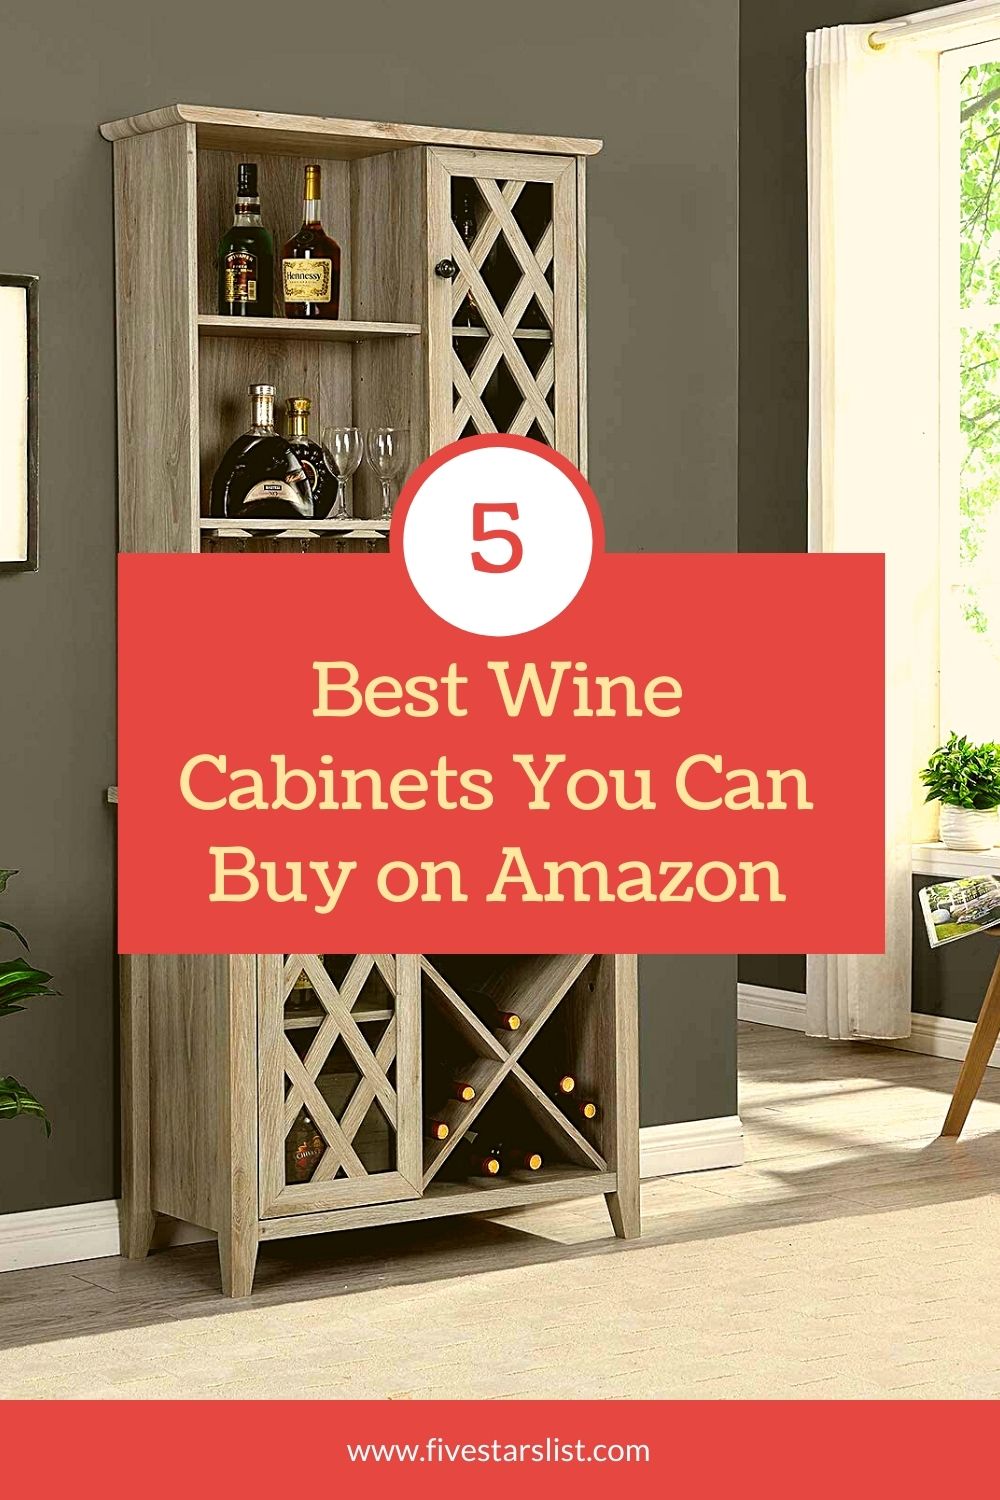 Best Wine Cabinet You Can Buy on Amazon